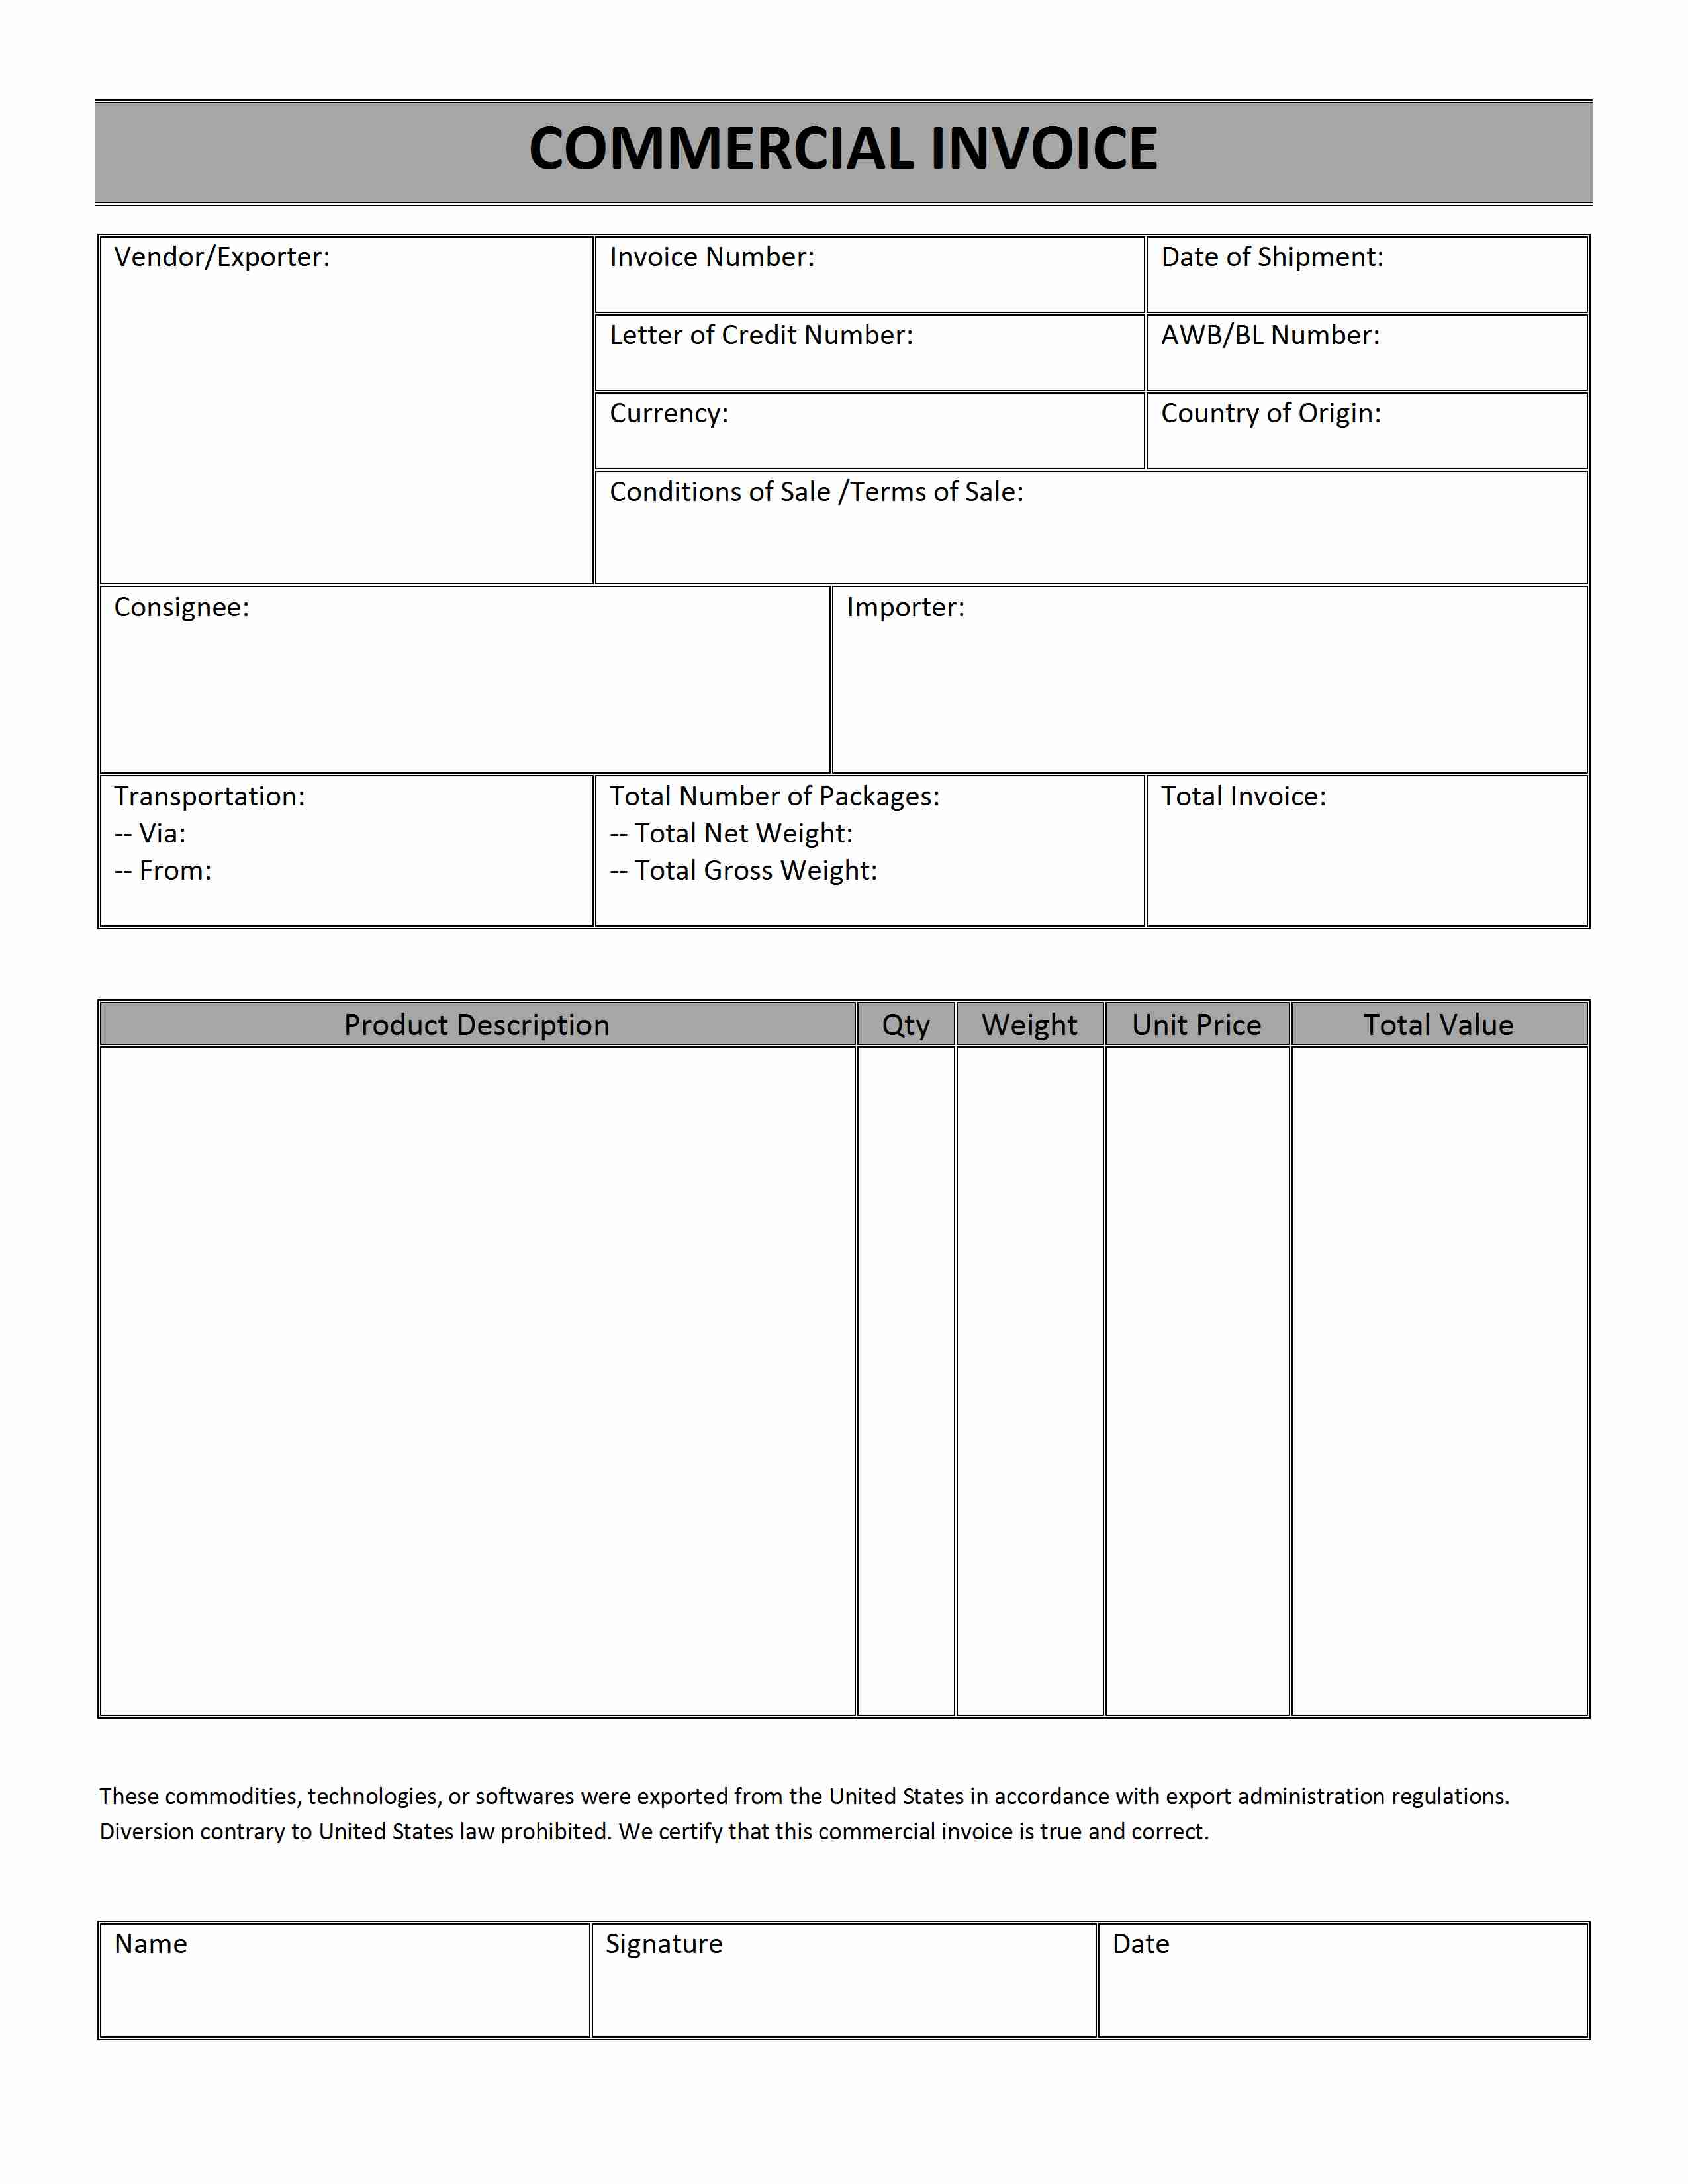 commercial invoice dhl form Fill Online, Printable, Fillable 